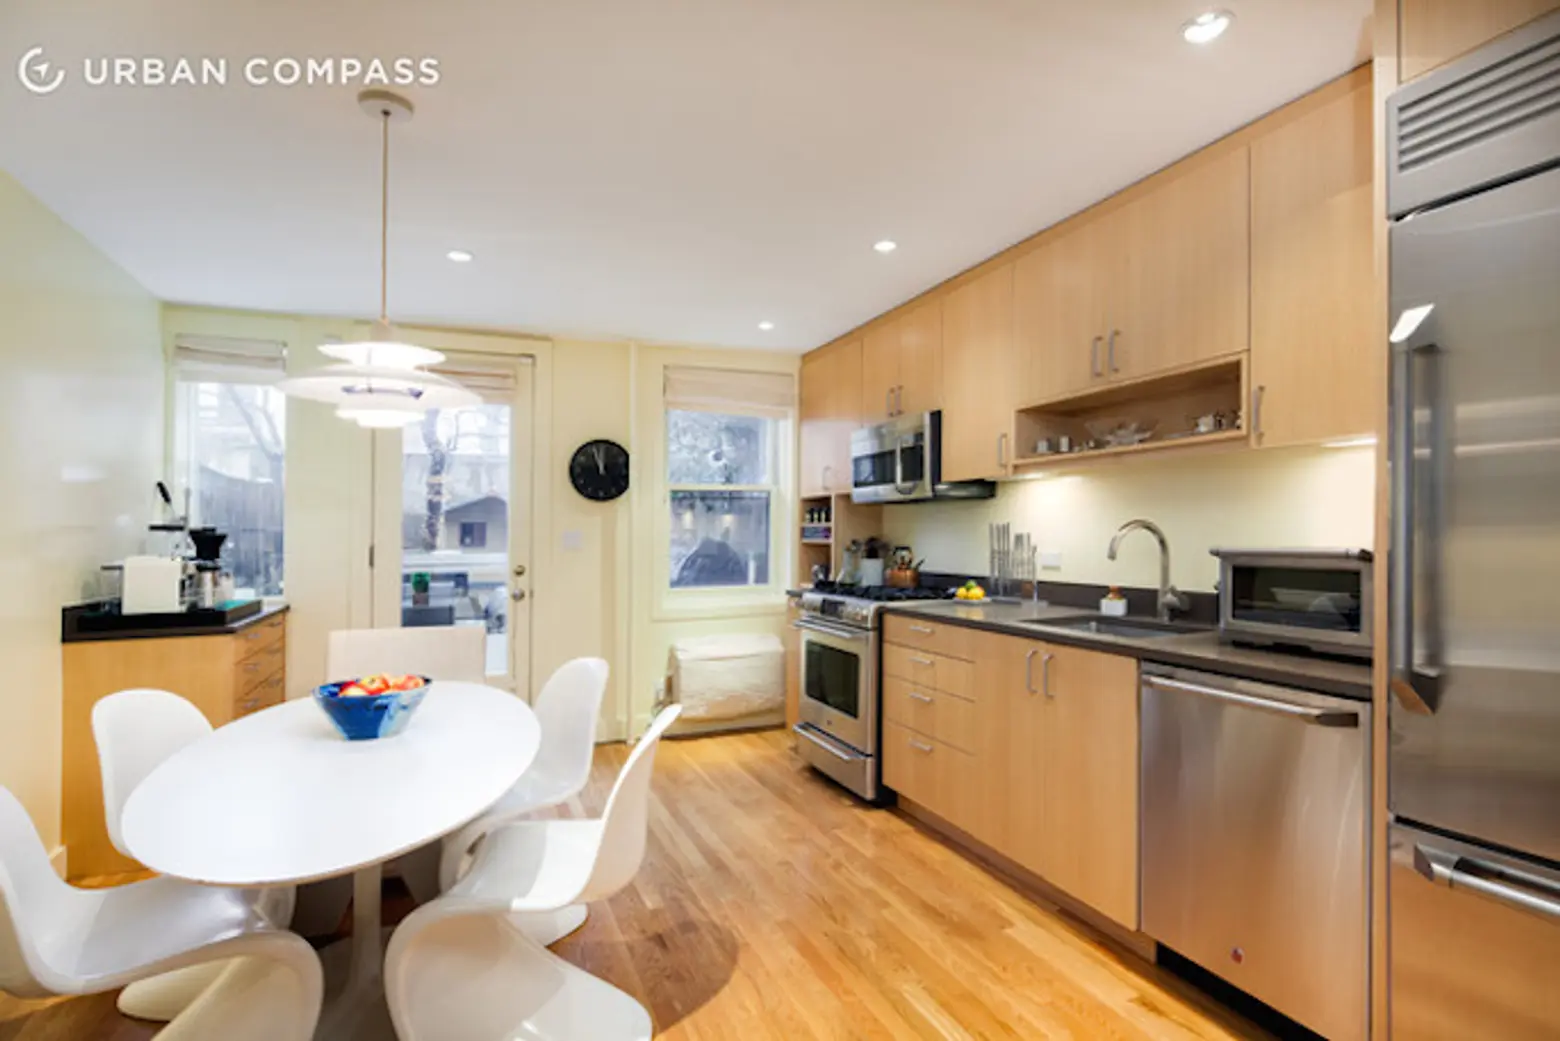 241 Sacket Street, landscaped garden with playhouse, renovated townhouse with green bathroom